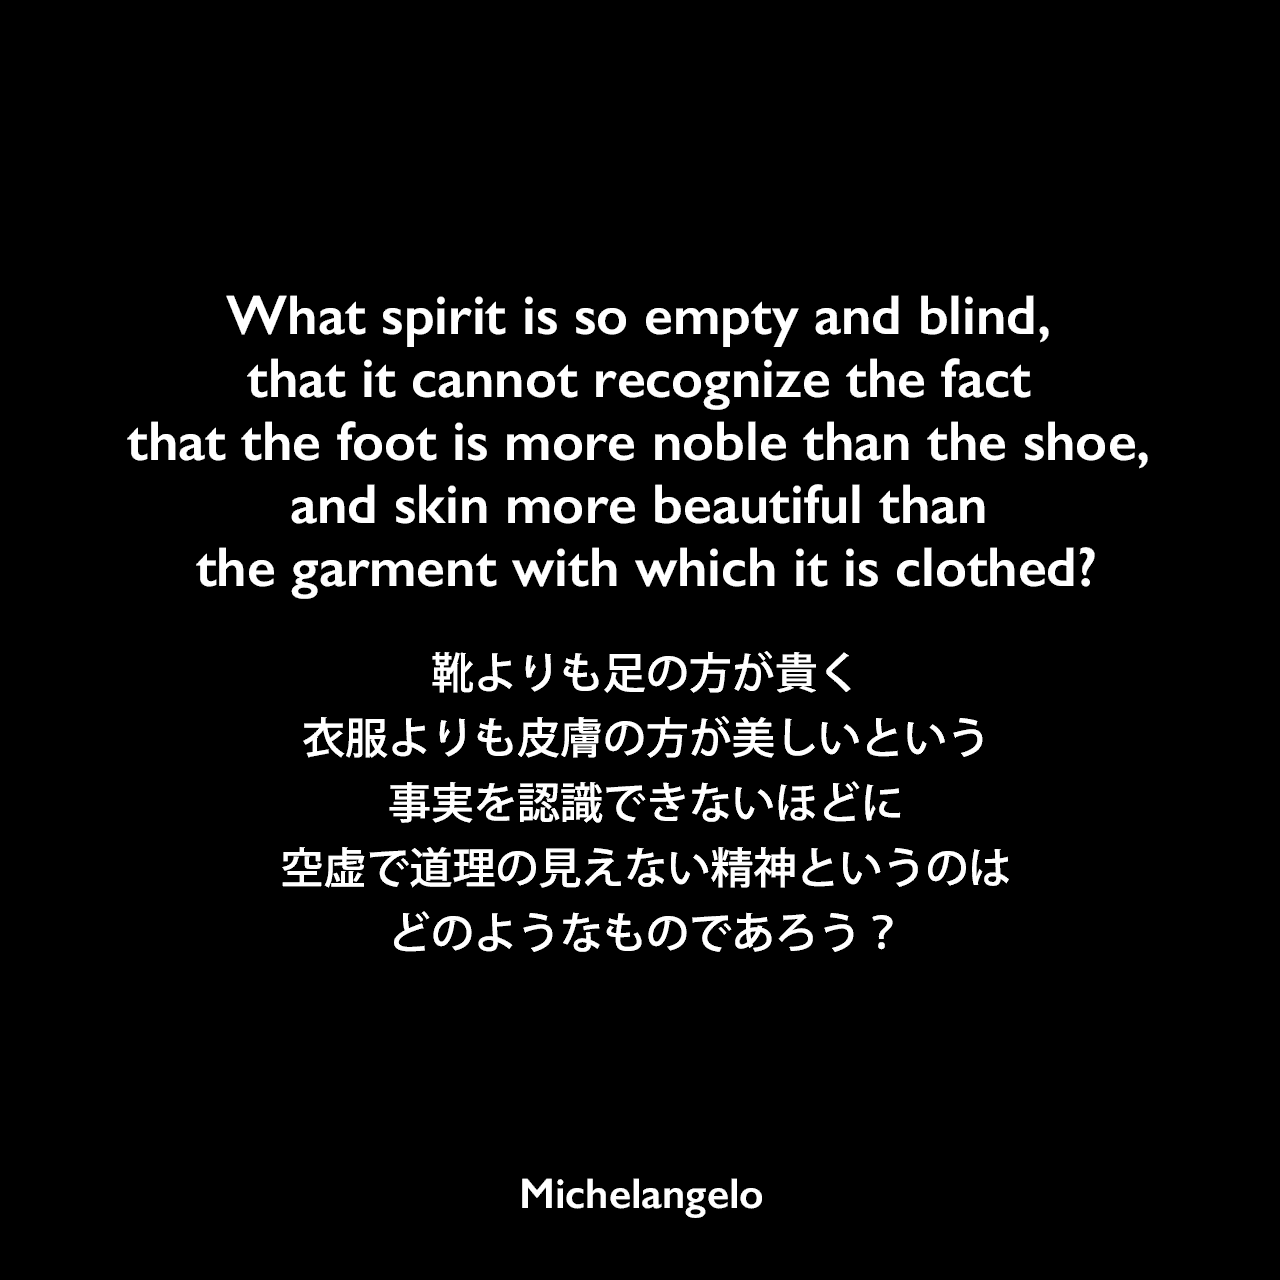 What spirit is so empty and blind, that it cannot recognize the fact that the foot is more noble than the shoe, and skin more beautiful than the garment with which it is clothed?靴よりも足の方が貴く、衣服よりも皮膚の方が美しいという事実を認識できないほどに、空虚で道理の見えない精神というのはどのようなものであろう？Michelangelo